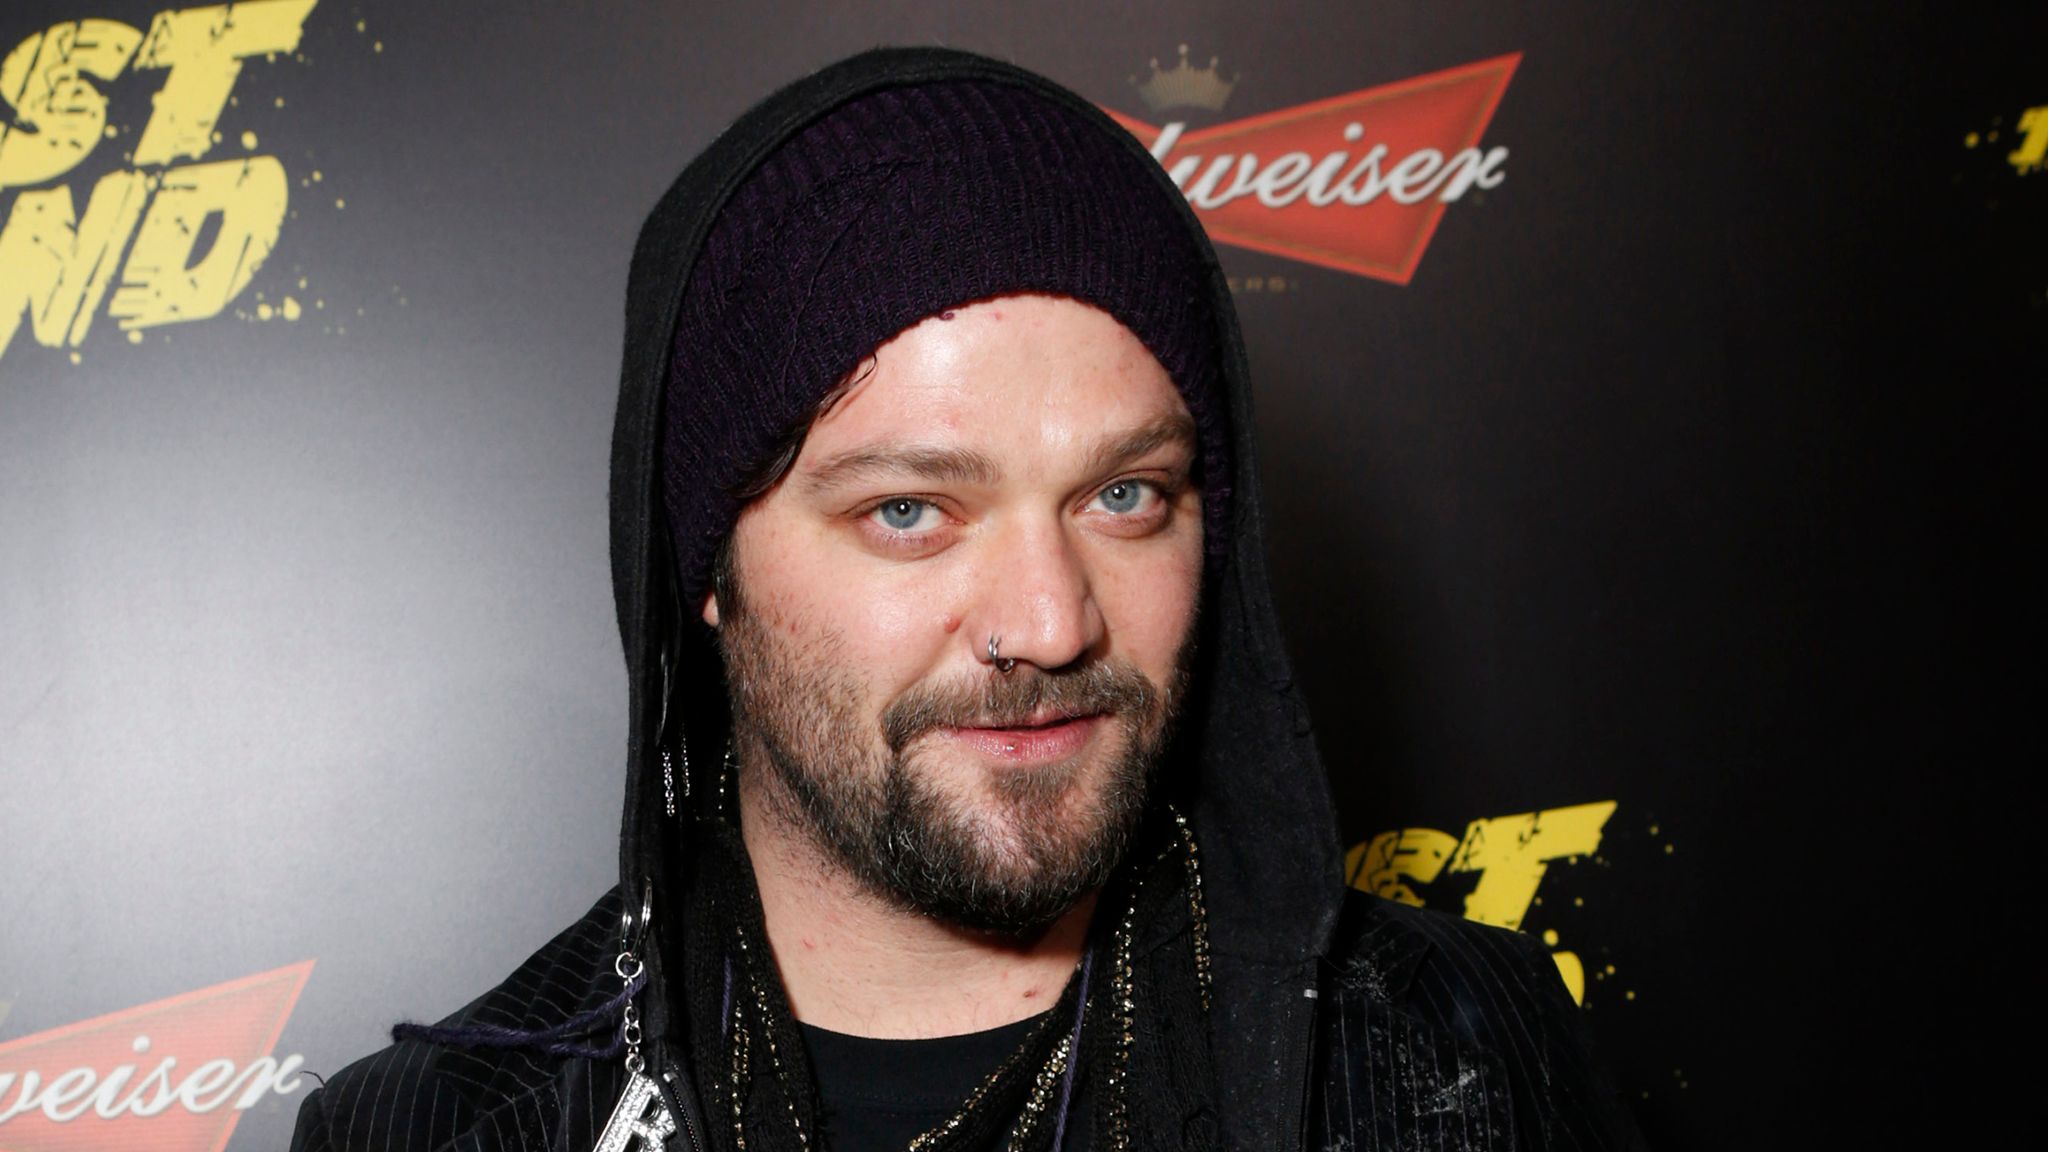 Bam Margera speaks out about street fight, maintains he is still sober